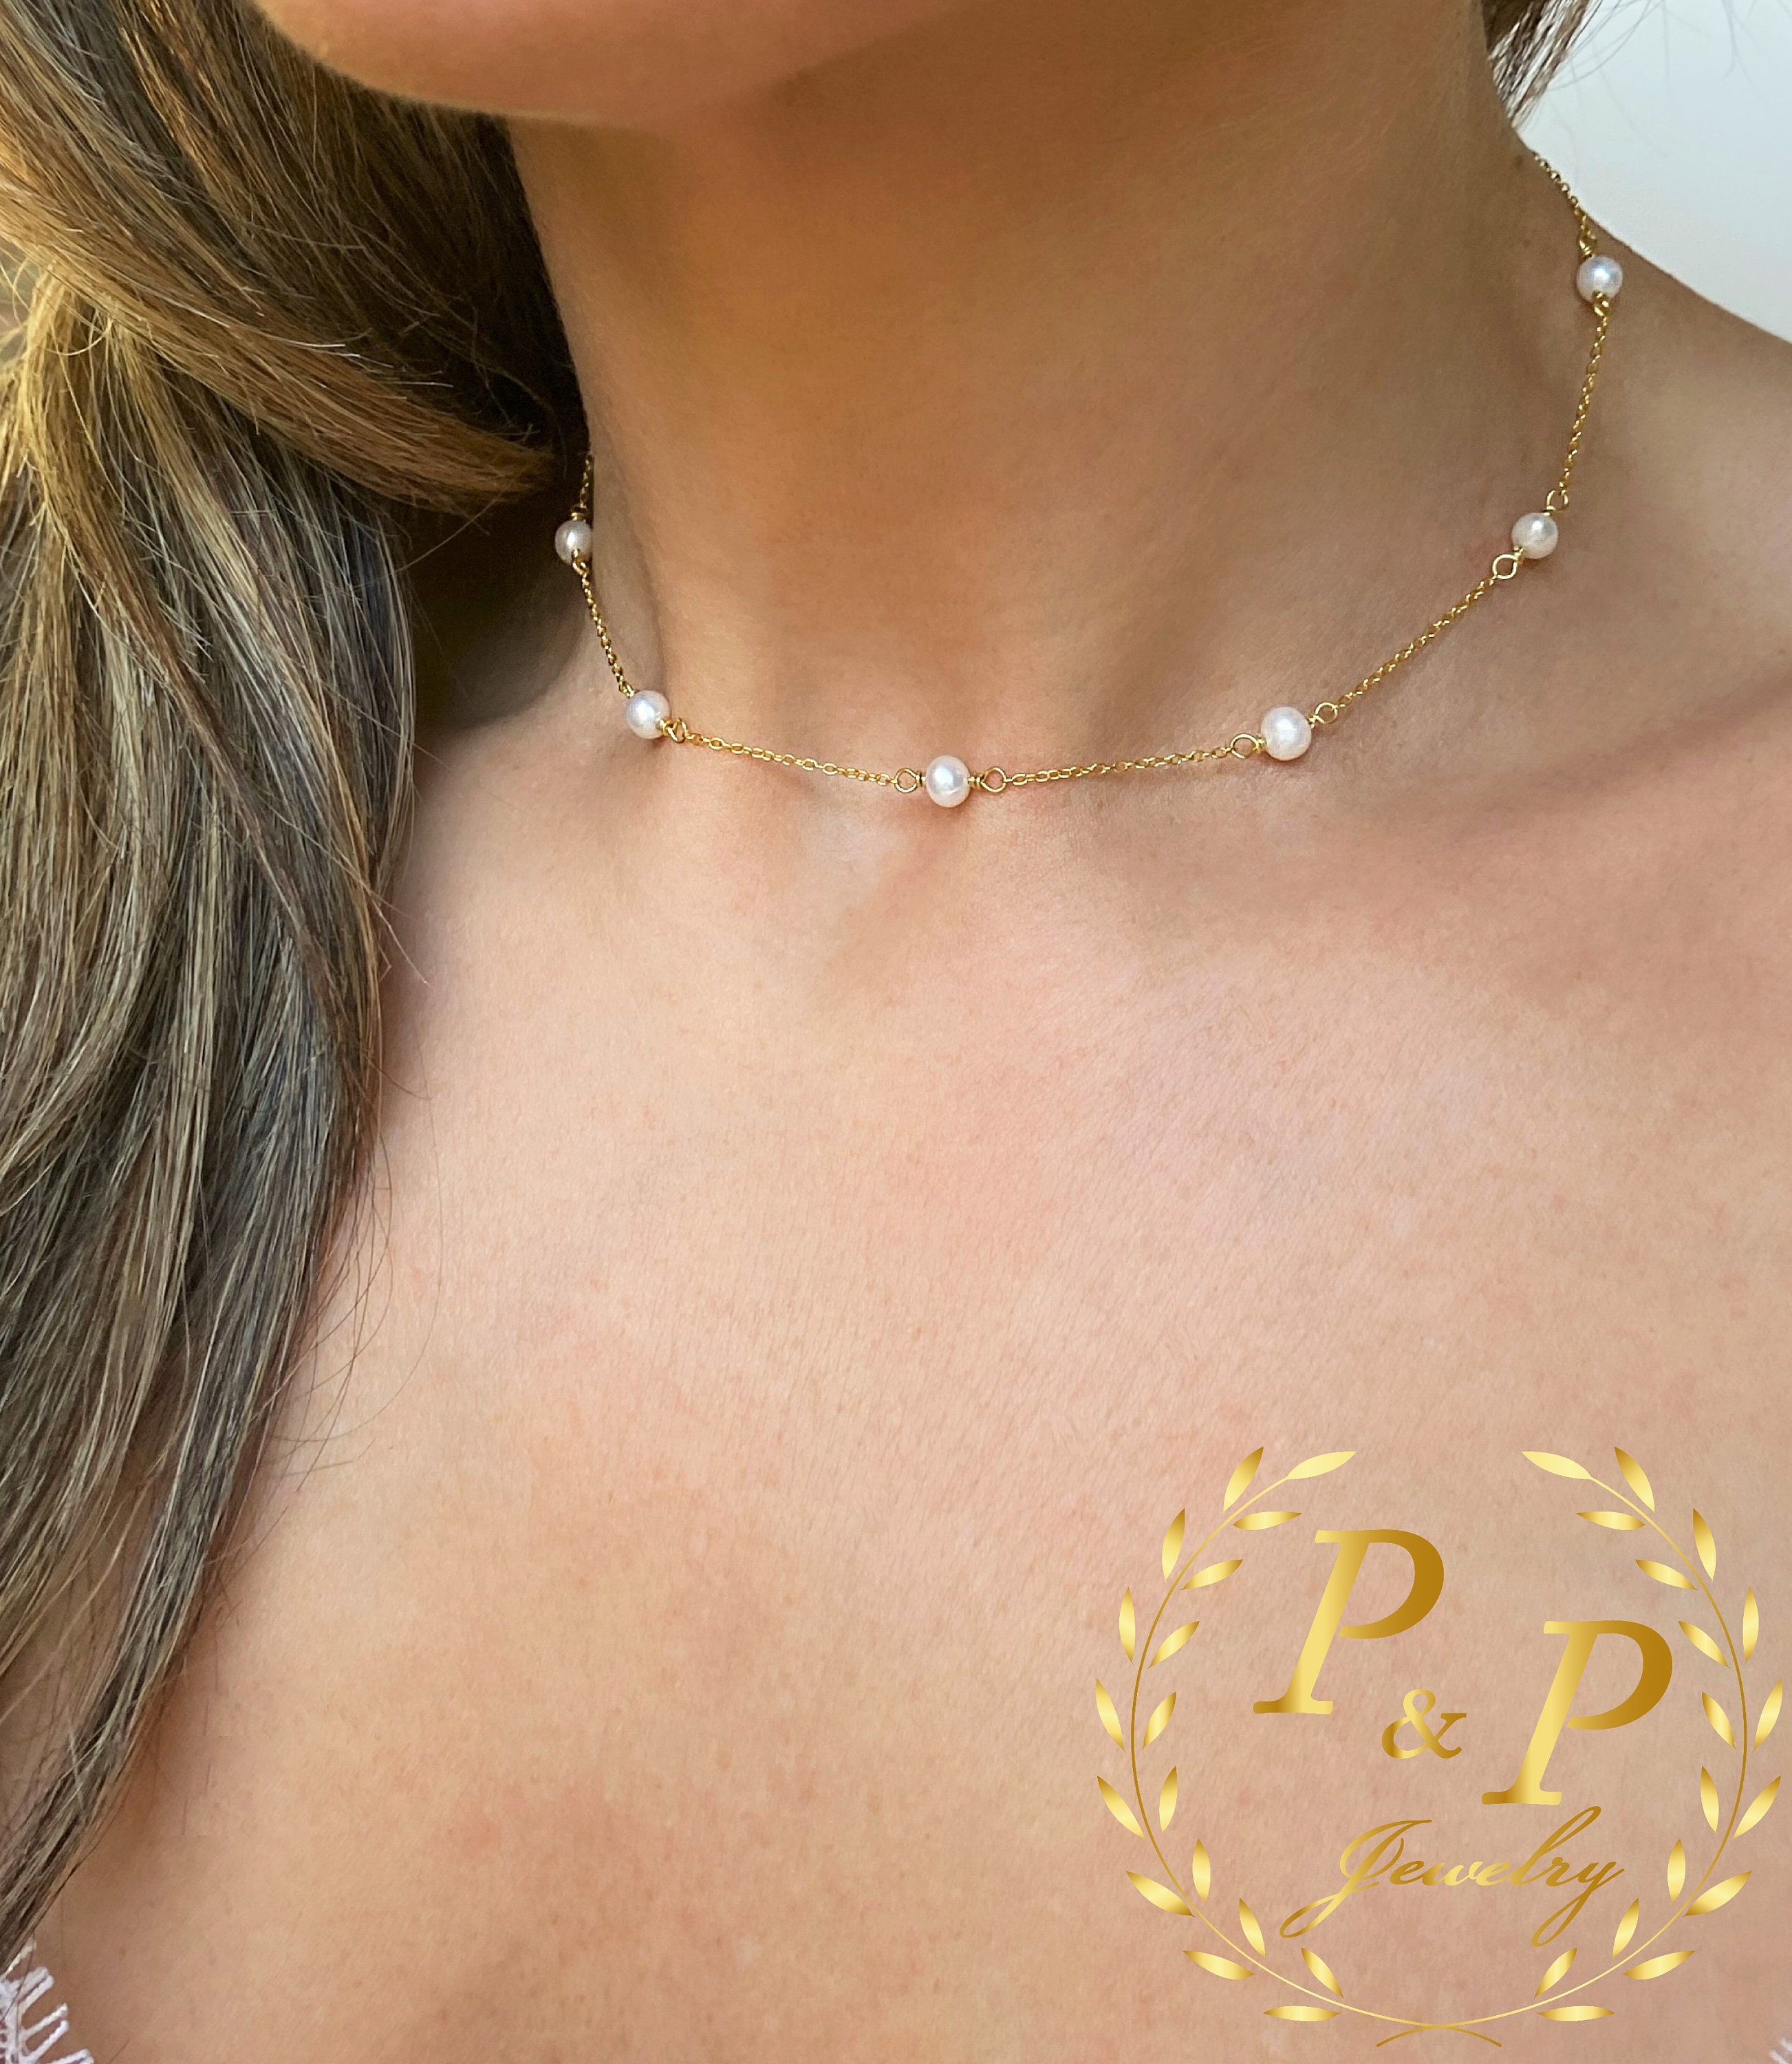 Buy Tiny Minimalist Little Pearl Gold Choker Necklace/ 18K Gold Necklace/ Tiny  Pearl Necklace,dainty Necklace/ Charm Necklace/ Bridesmaid Gift U Online in  India - Etsy